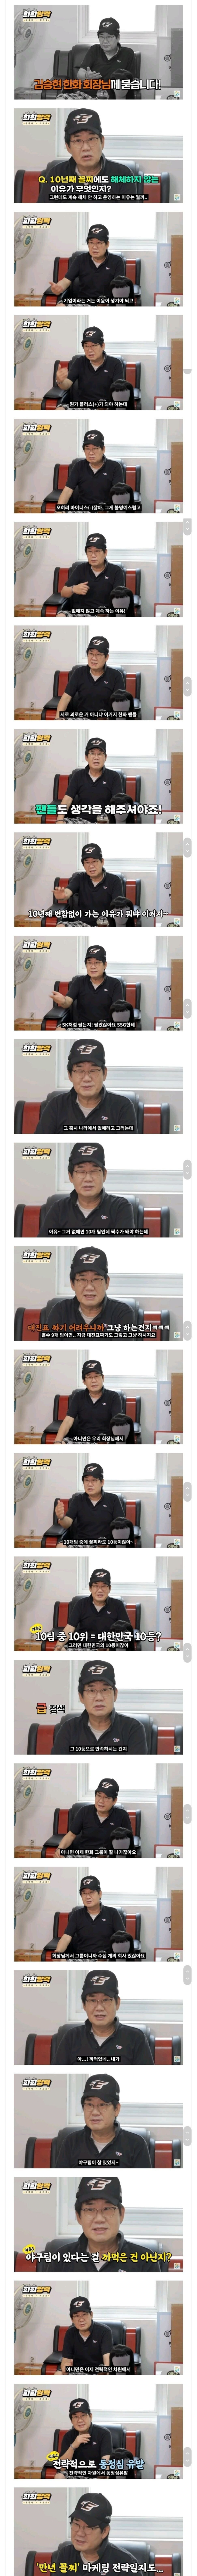 A Celebrity Who Hits Hanwha Chairman With No Turning Back ShakingJPG